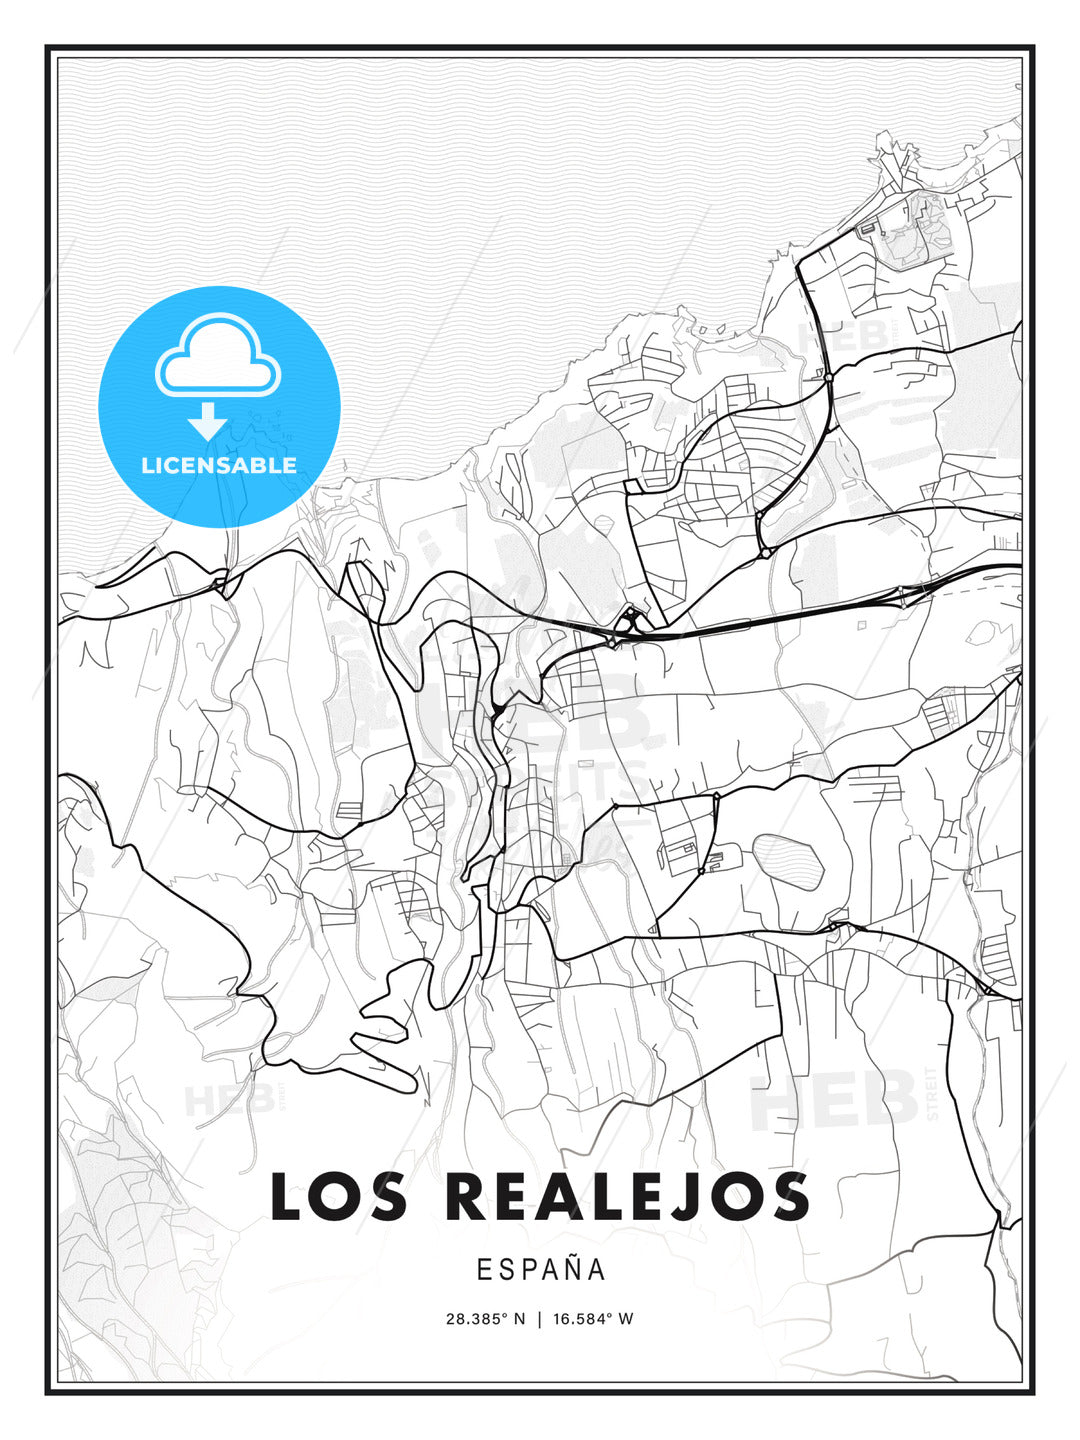 Los Realejos, Spain, Modern Print Template in Various Formats - HEBSTREITS Sketches